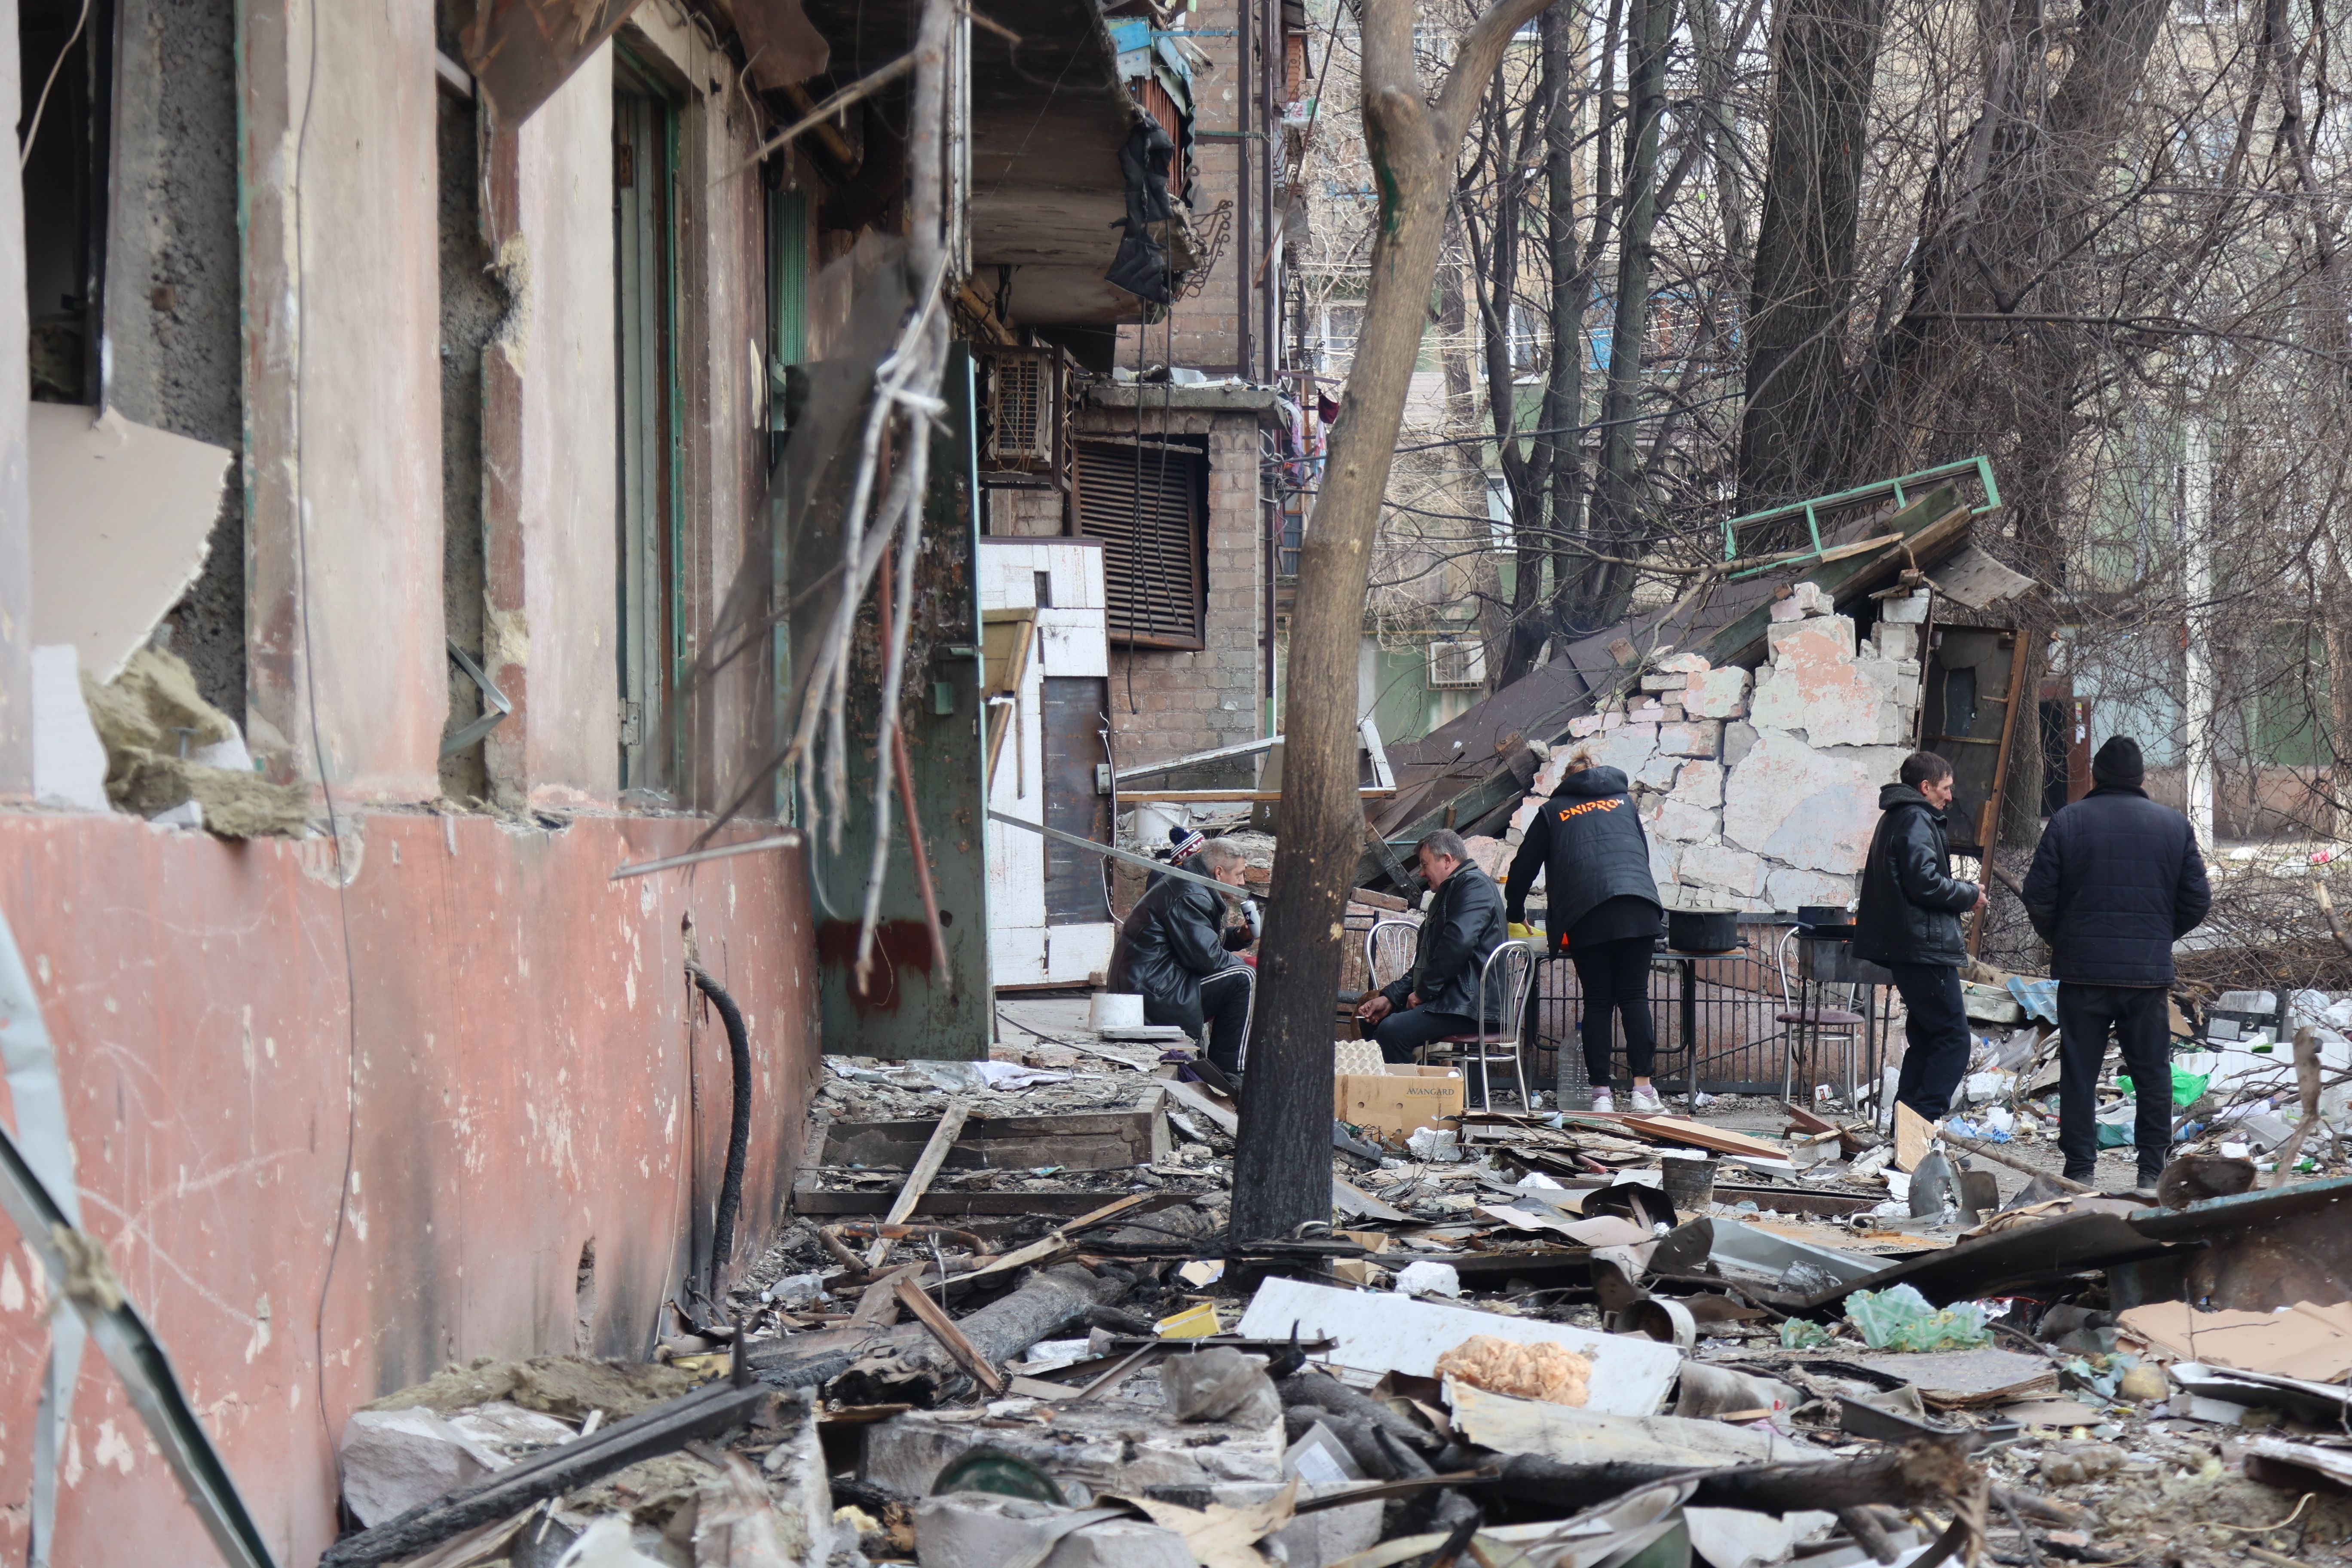  A view of damaged buildings and vehicles after shelling in the Ukrainian city of Mariupol under the control of Russian military and pro-Russian separatists, on March 29.